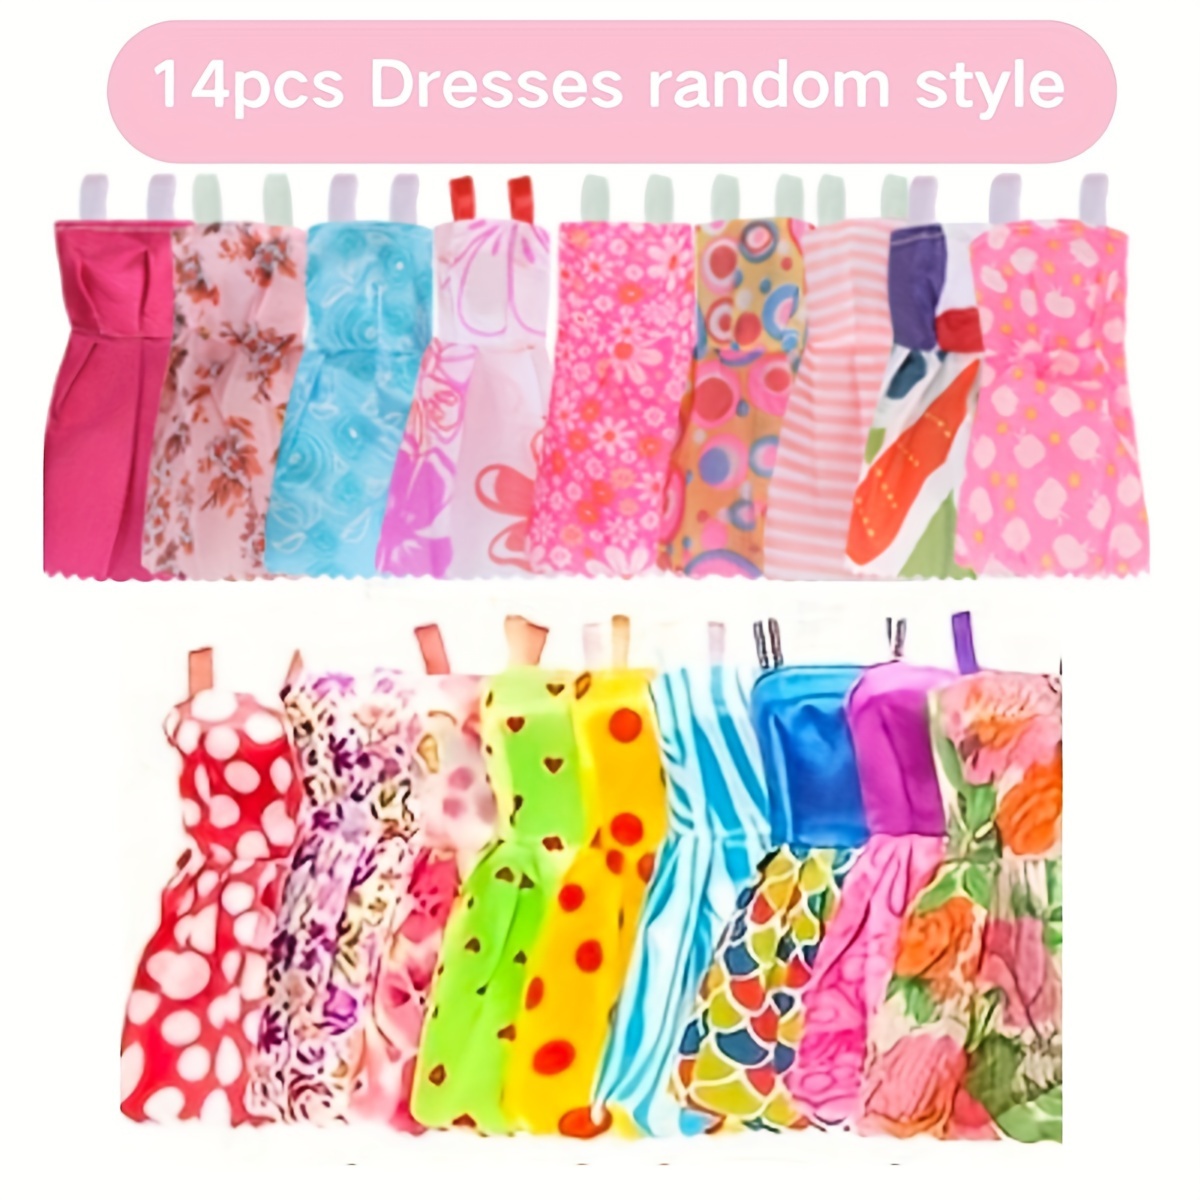 59 Pcs Doll Accessories - 12 Fashion Dresses 3 Party Gowns 4 Outfits 3  Swimsuits Bikini with 37 Accessories for 11.5 Inch Dolls